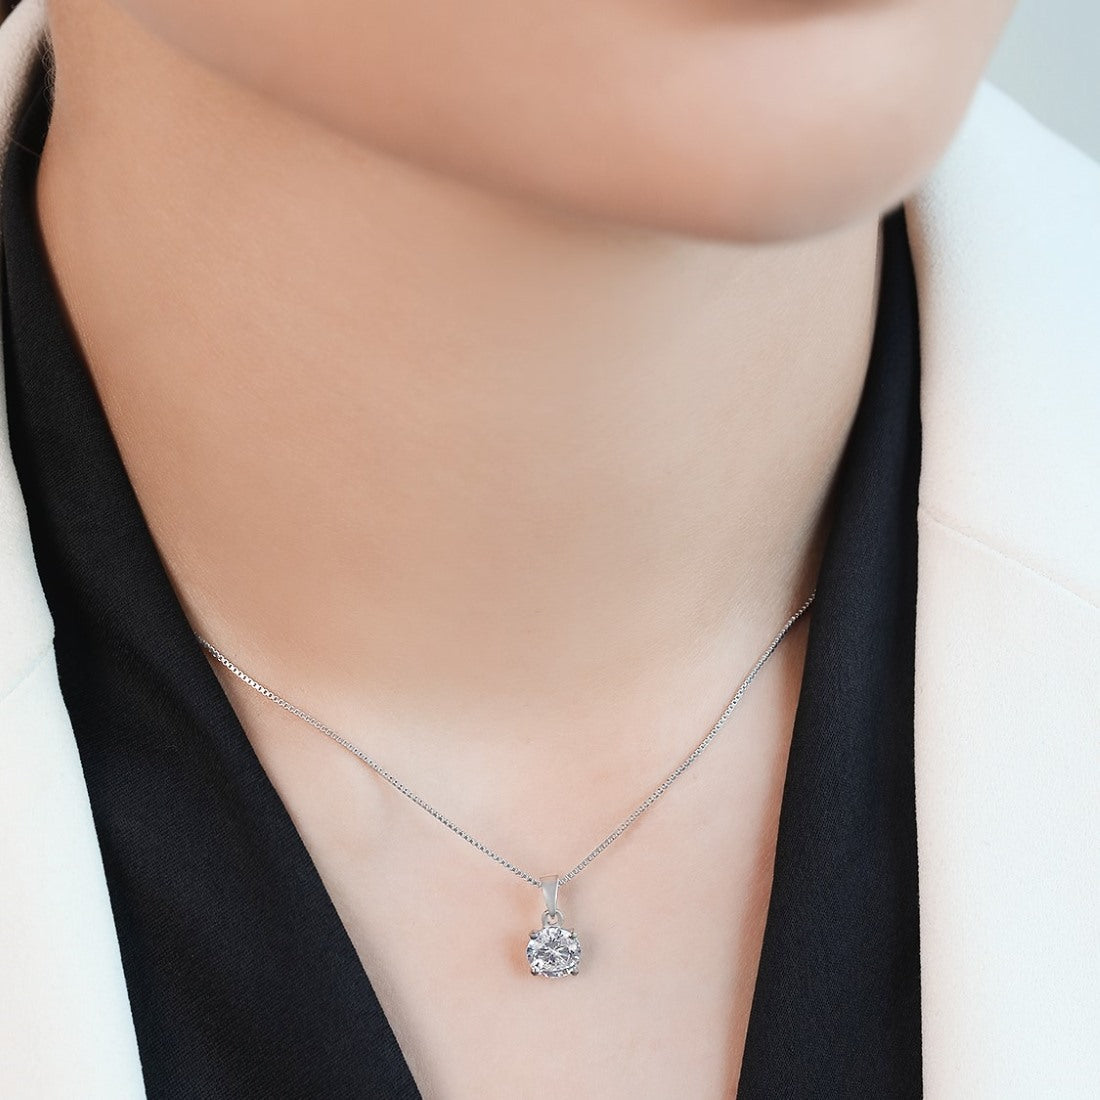 Solitaire 925 Silver Necklace Chain